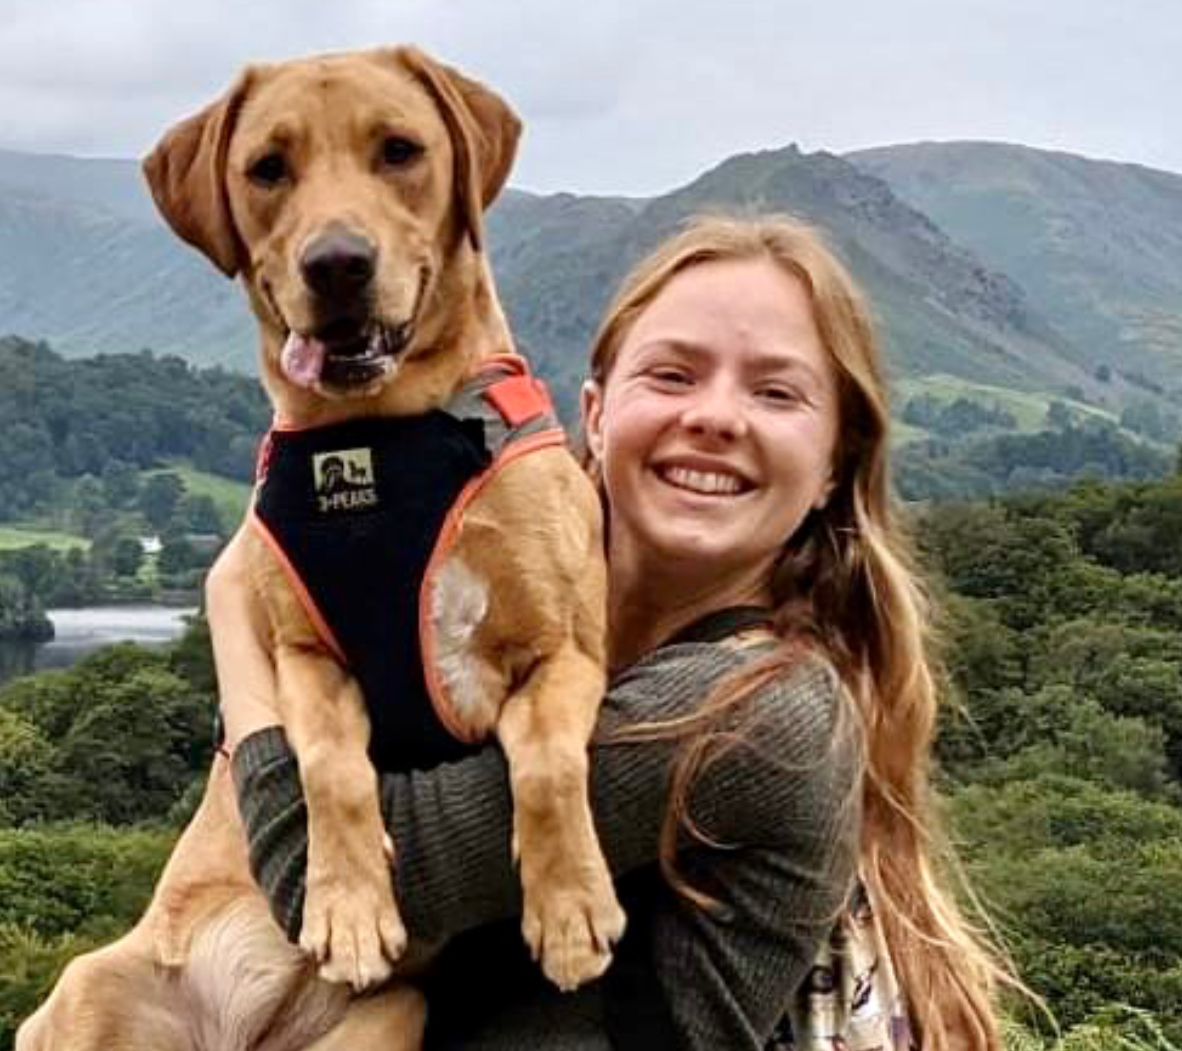 picture of Molly Beetham (right) on a hillside, with Daisy the adorable Labrador